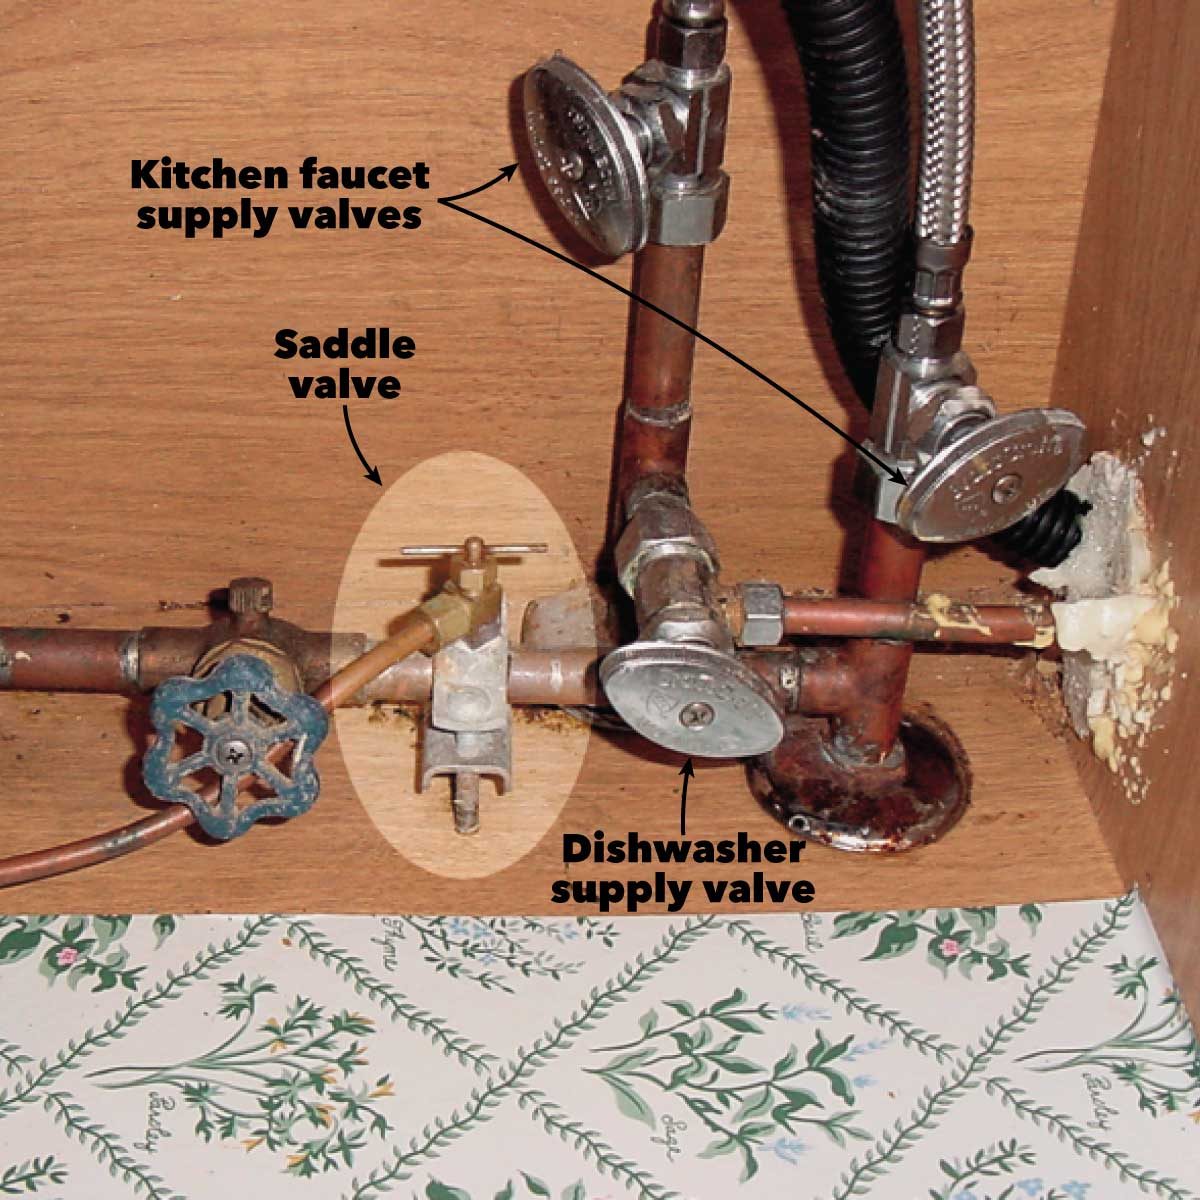 How to Turn off Gas to a Stove at the Shutoff Valve